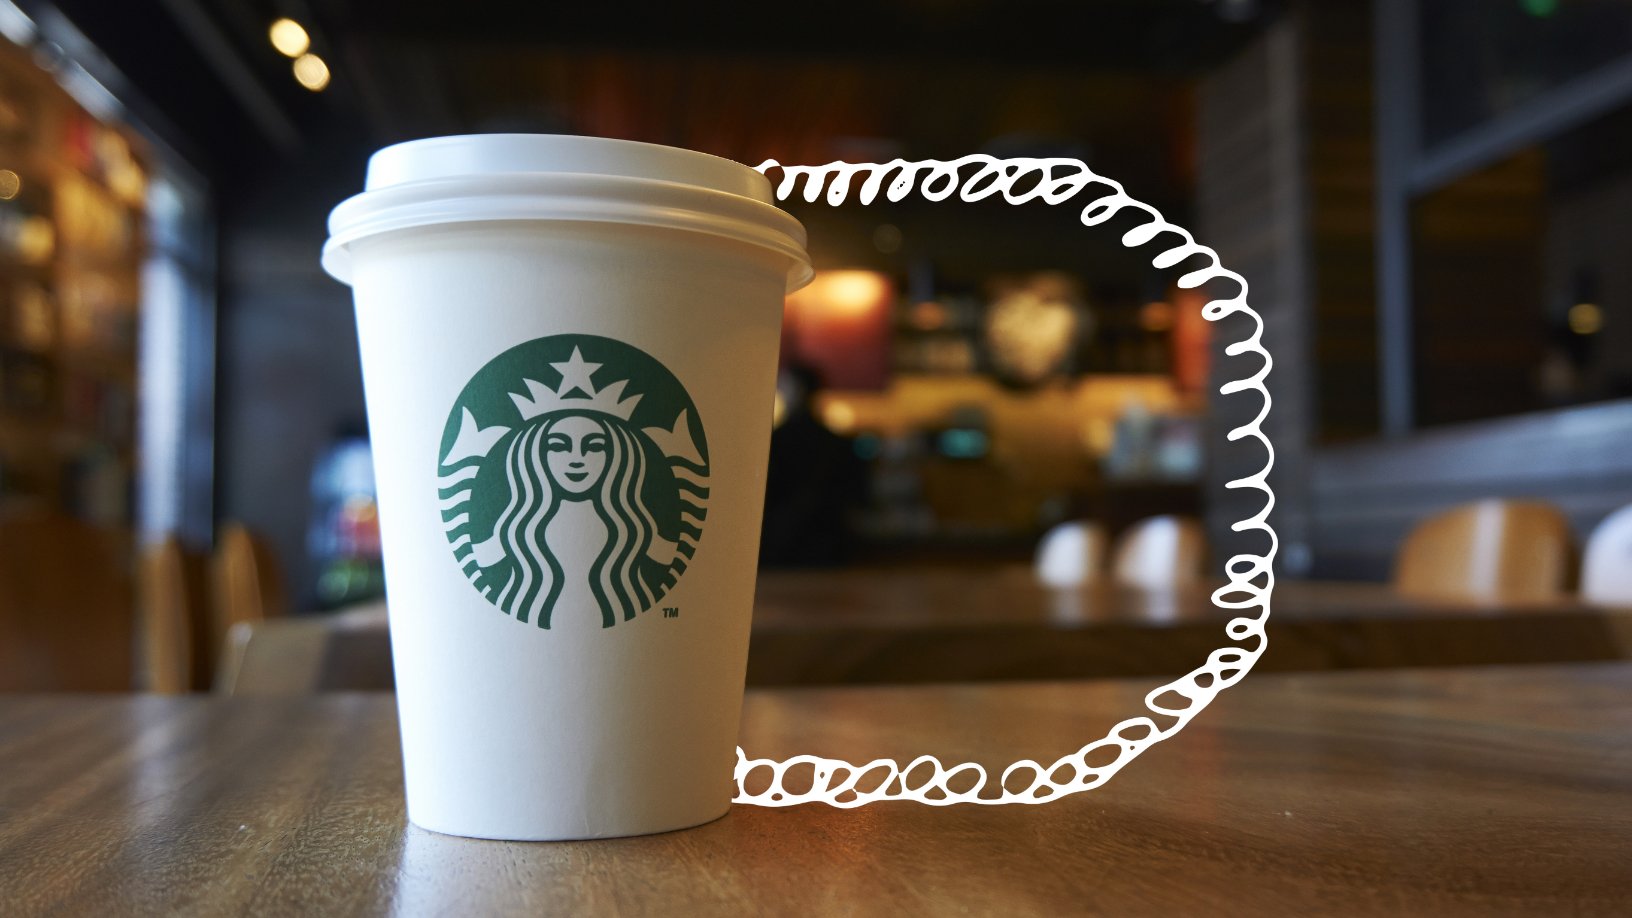 Starbucks Closes The Loop and Recycles Their Cups in Partnership With Sustana